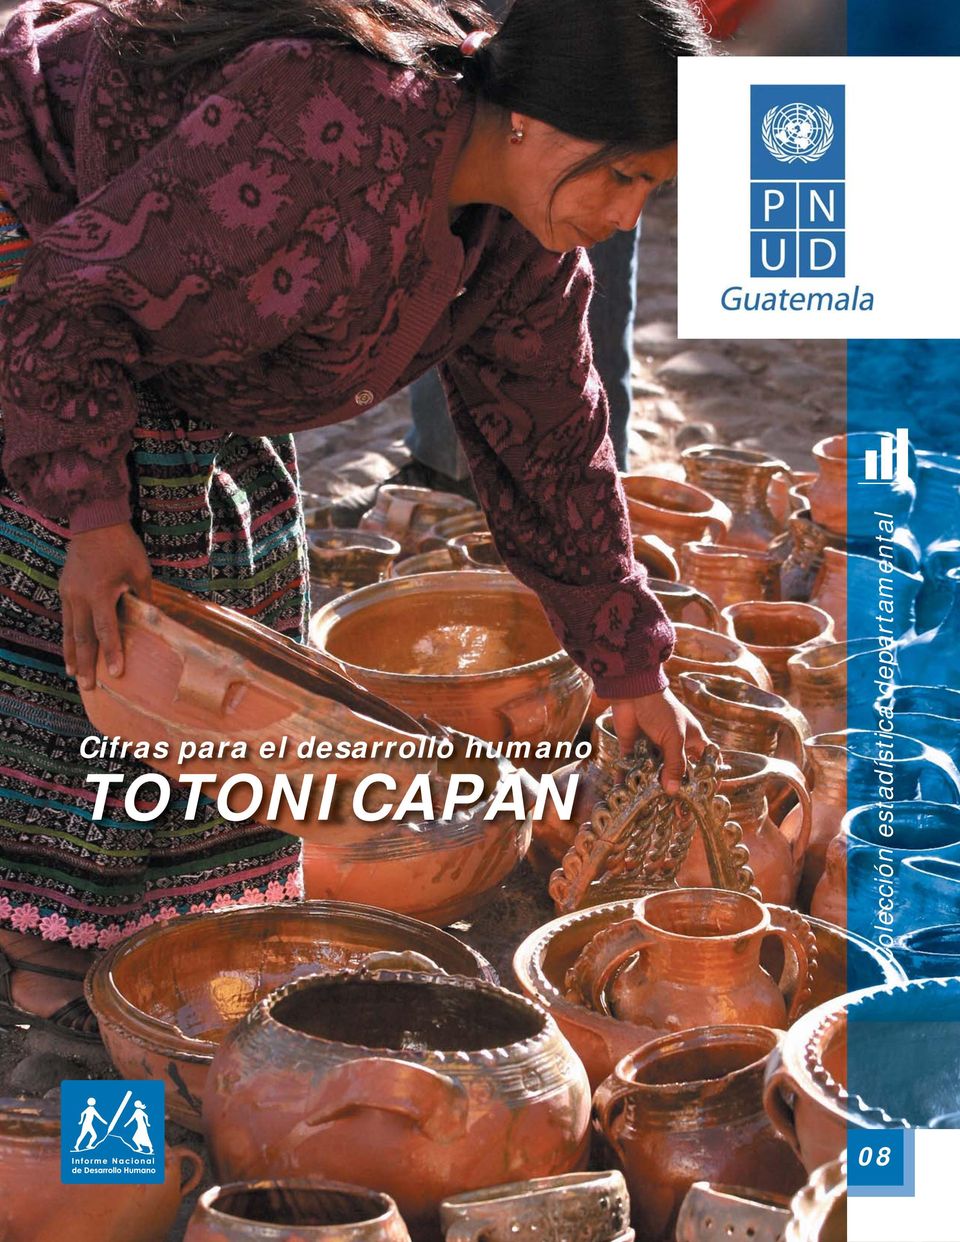 TOTONICAPAN